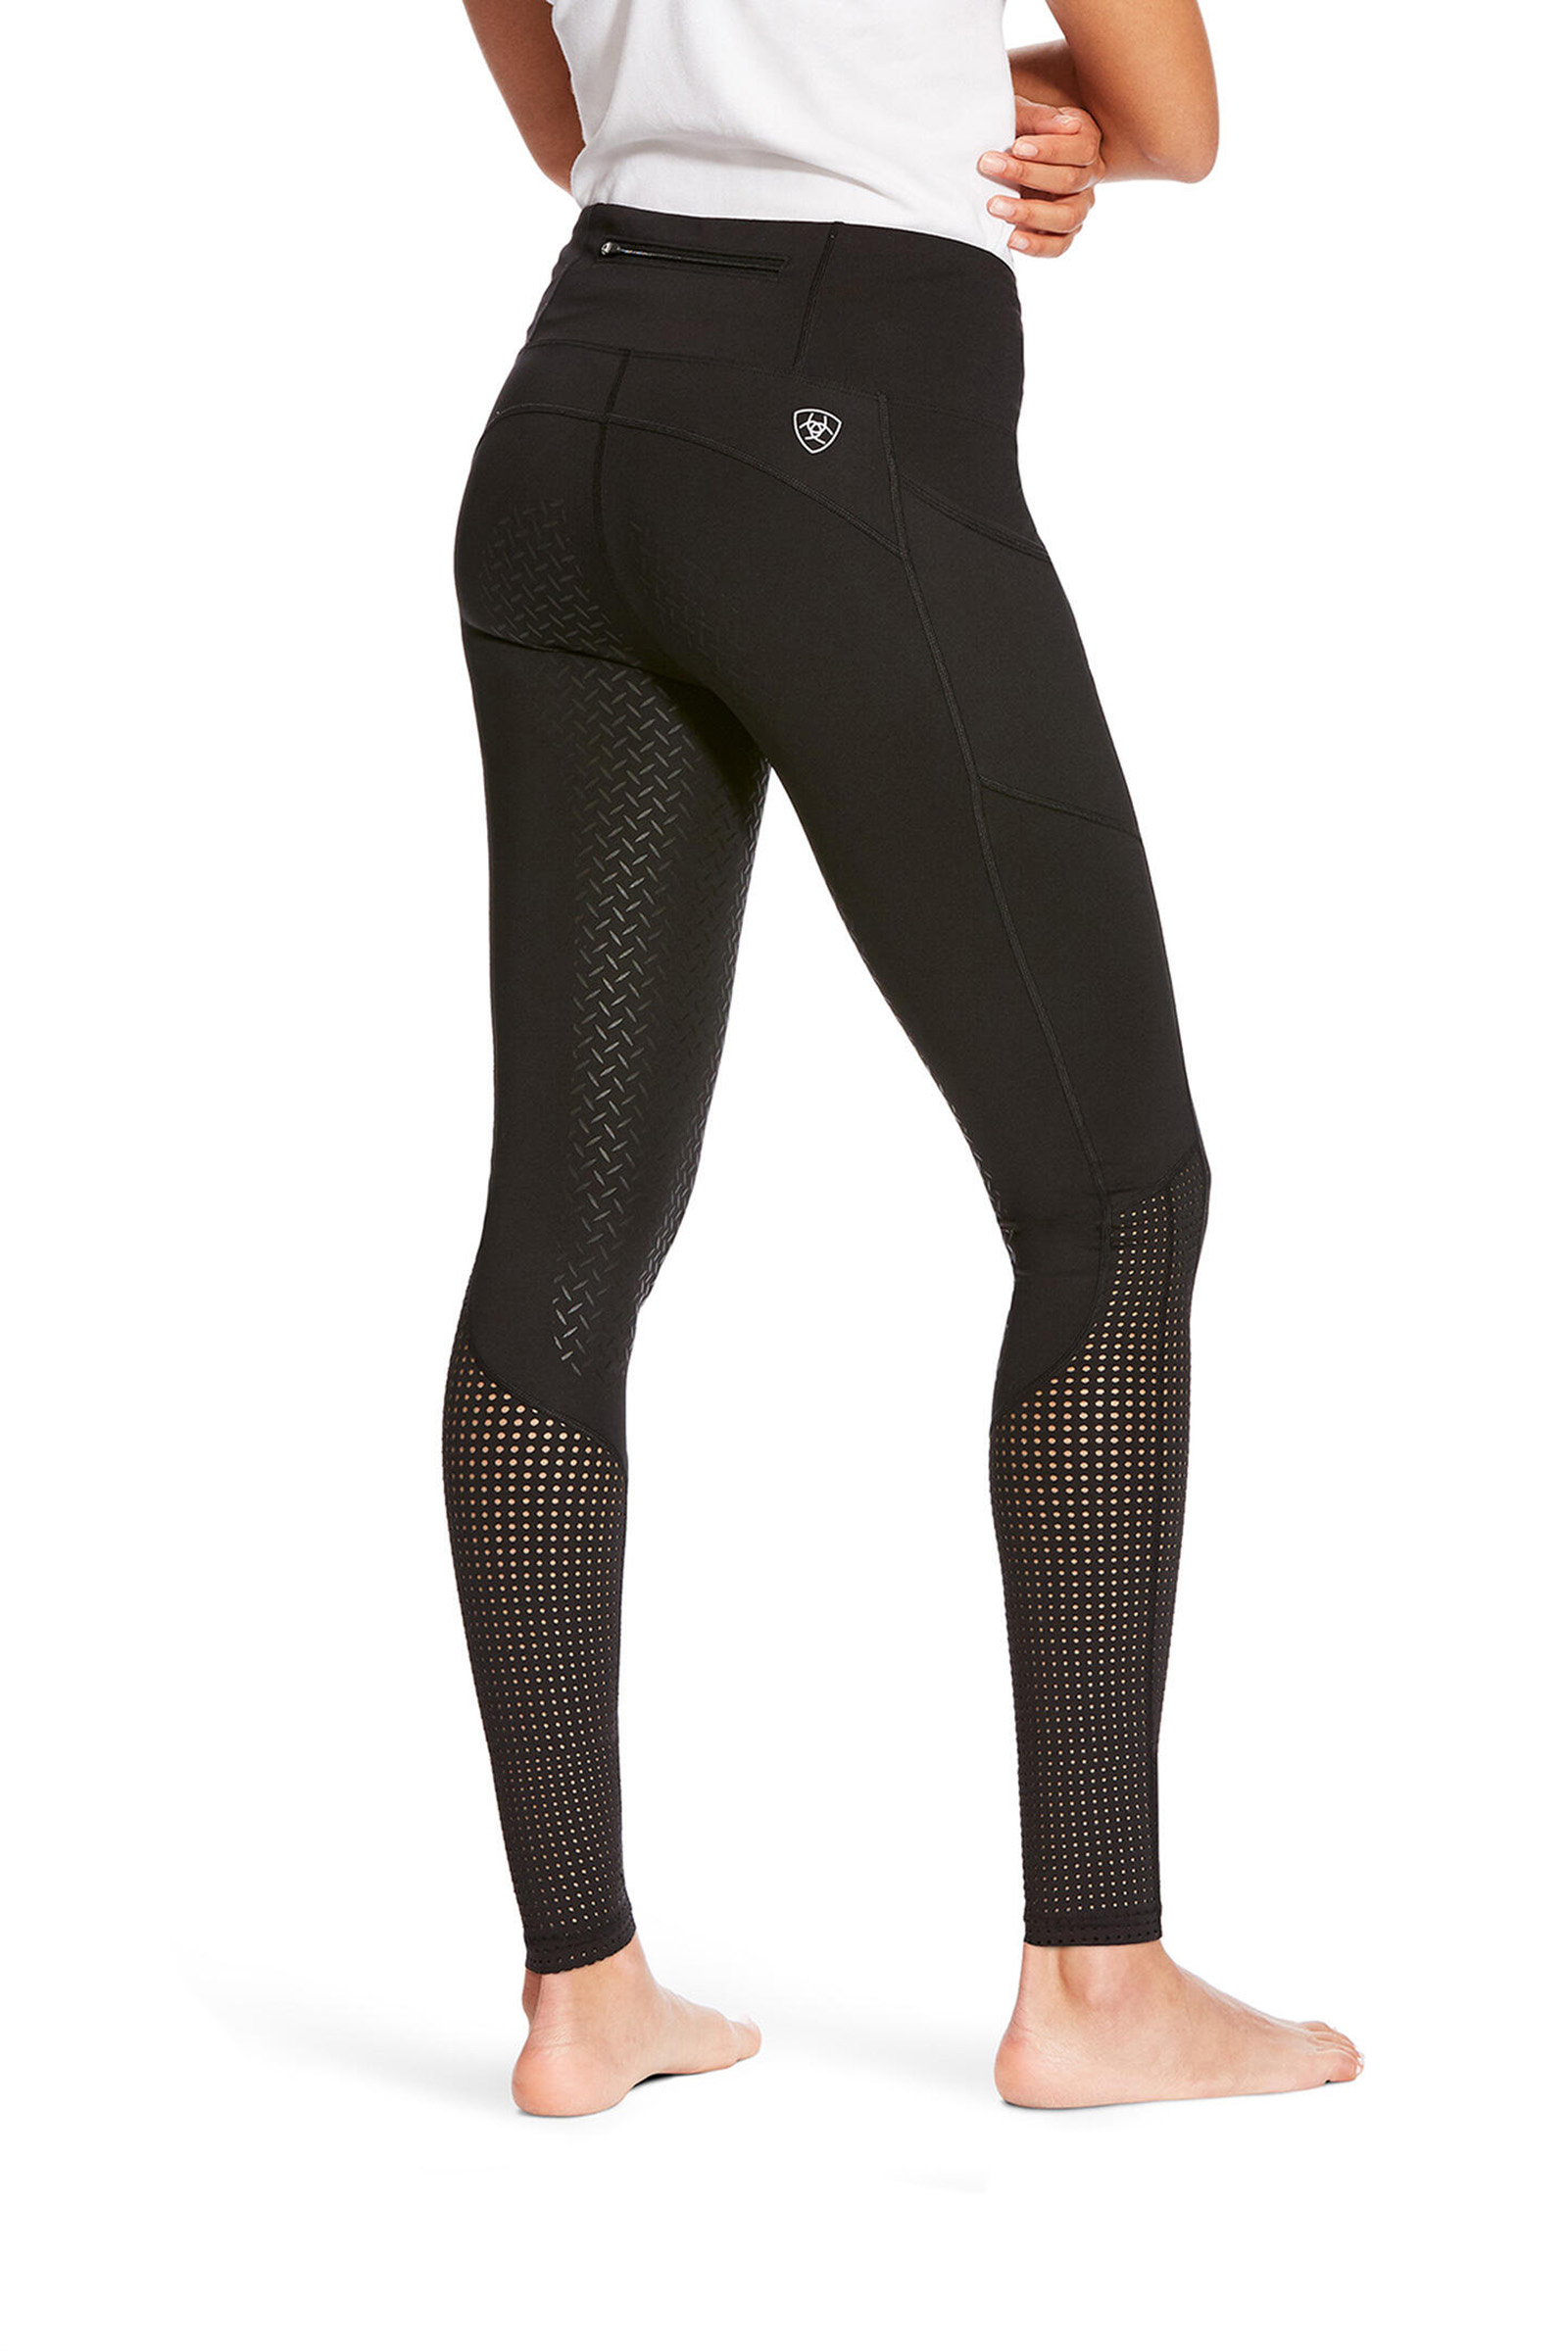 Ariat Women's Eos Full Seat Tights for Women